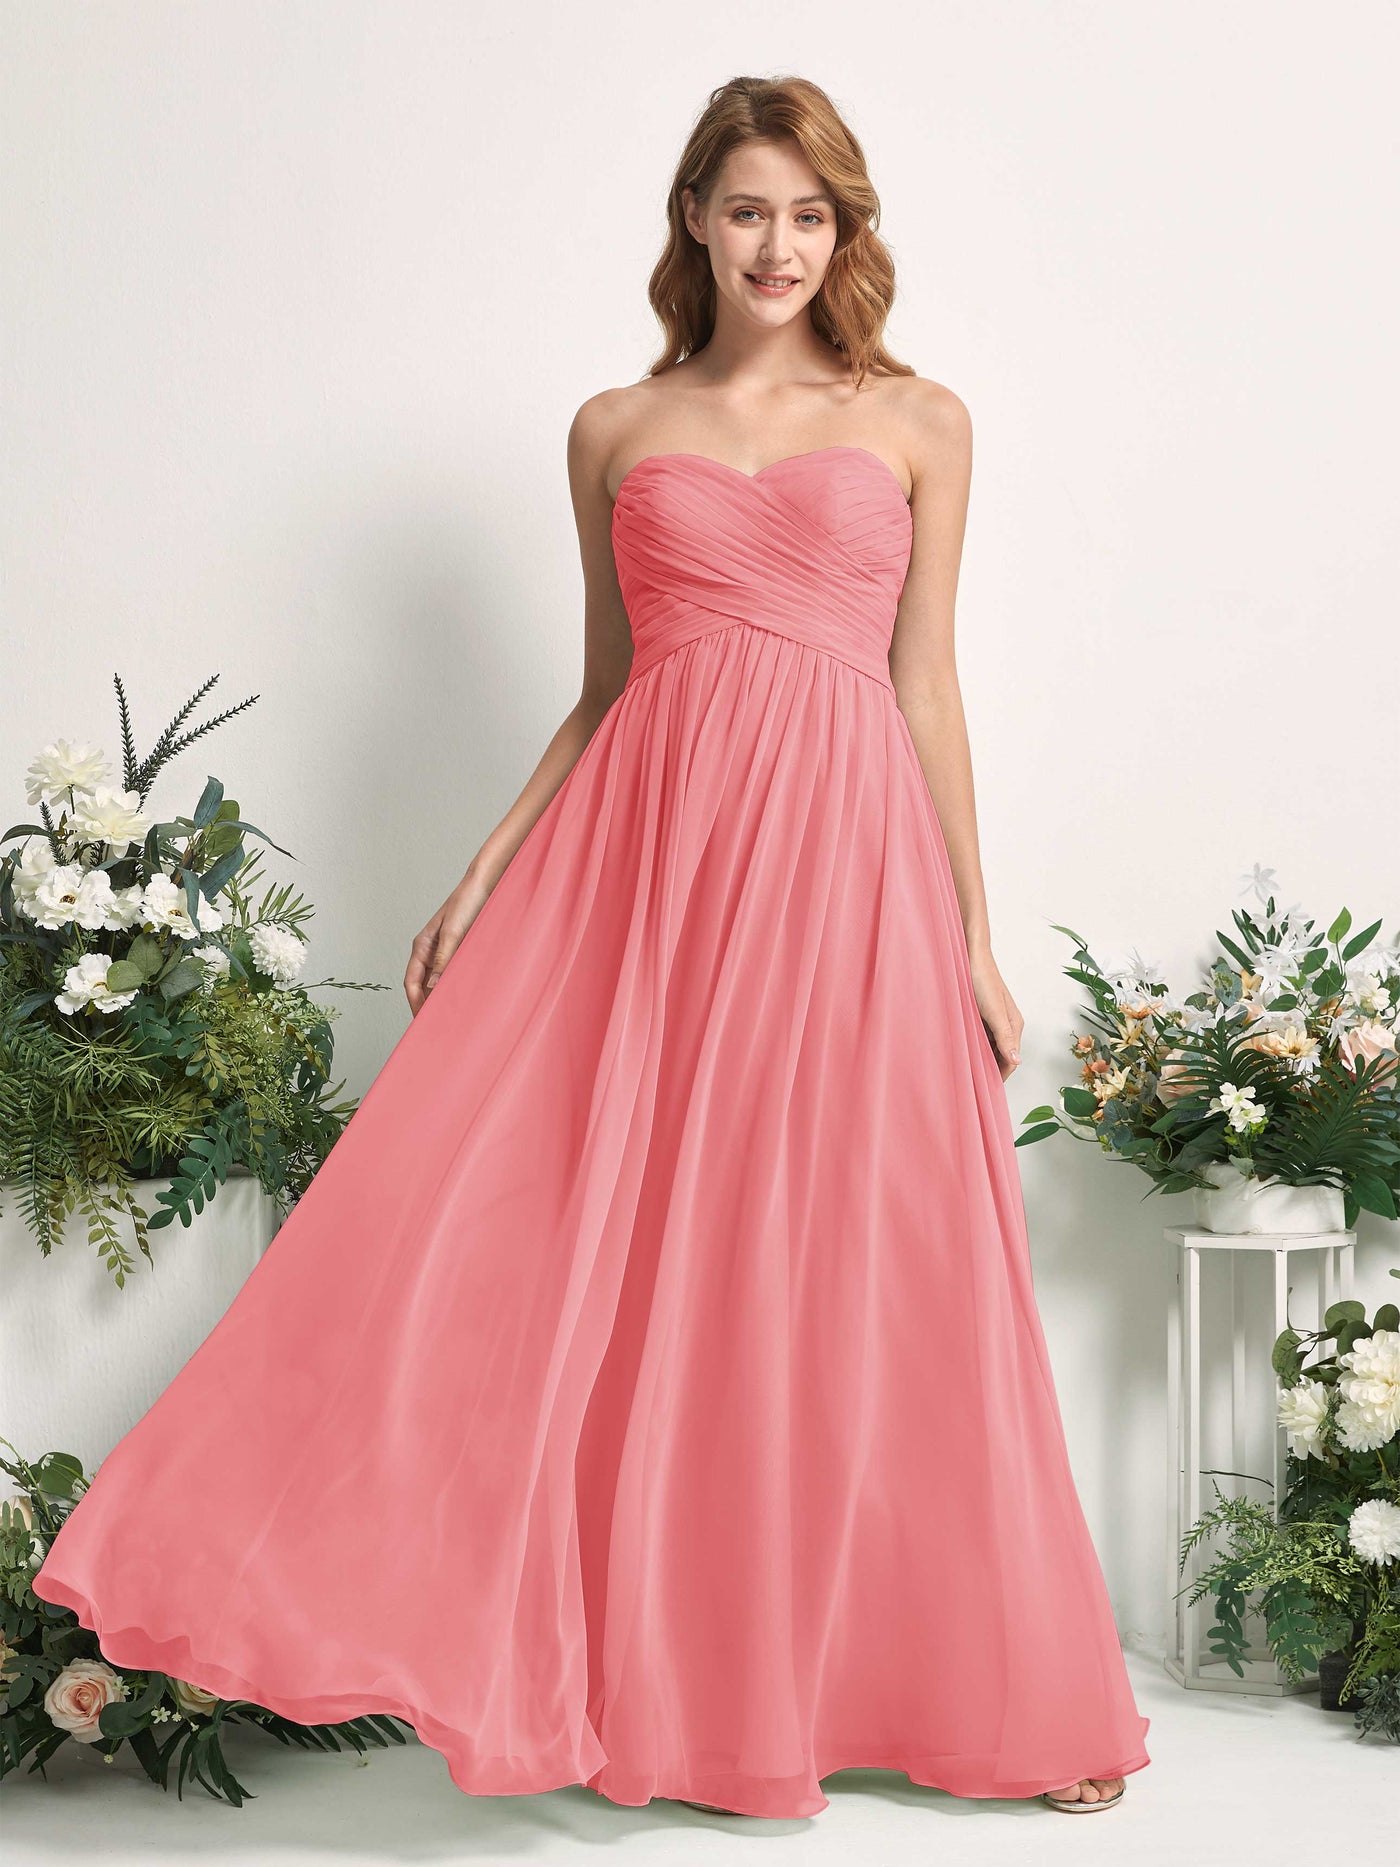 Bridesmaid Dress A-line Chiffon Sweetheart Full Length Sleeveless Wedding Party Dress - Coral Pink (81226930)#color_coral-pink